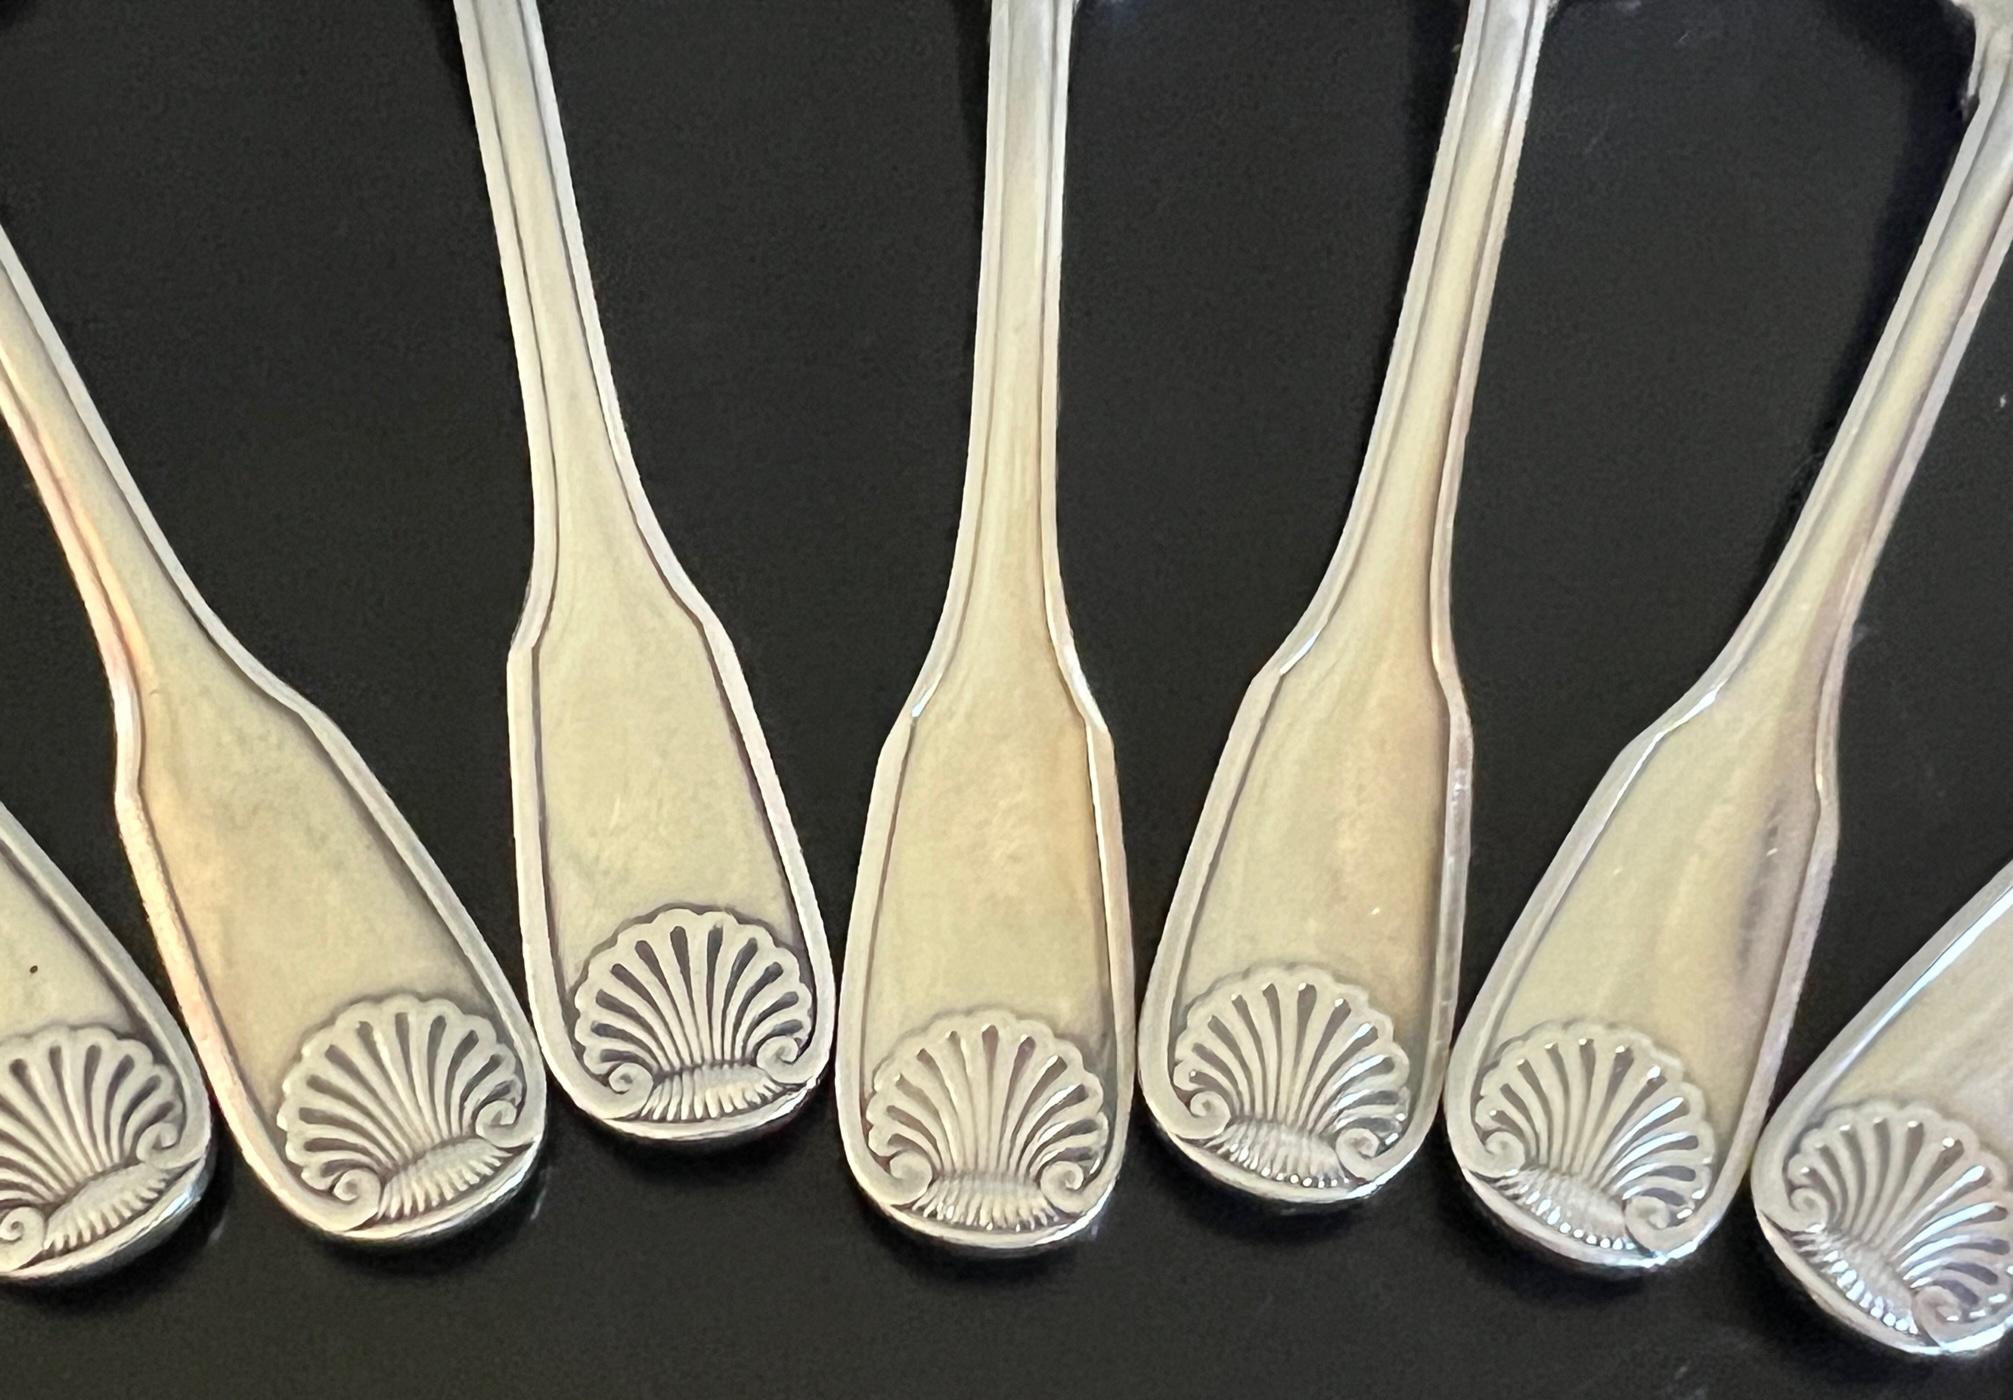 Set of twelve vintage silver plated demitasse spoons in the Vendome pattern, made in France by Christofle. Each spoon has a shell on the end of each spoon, top and bottom.

The stamp on each spoon was used from 1935-1983.